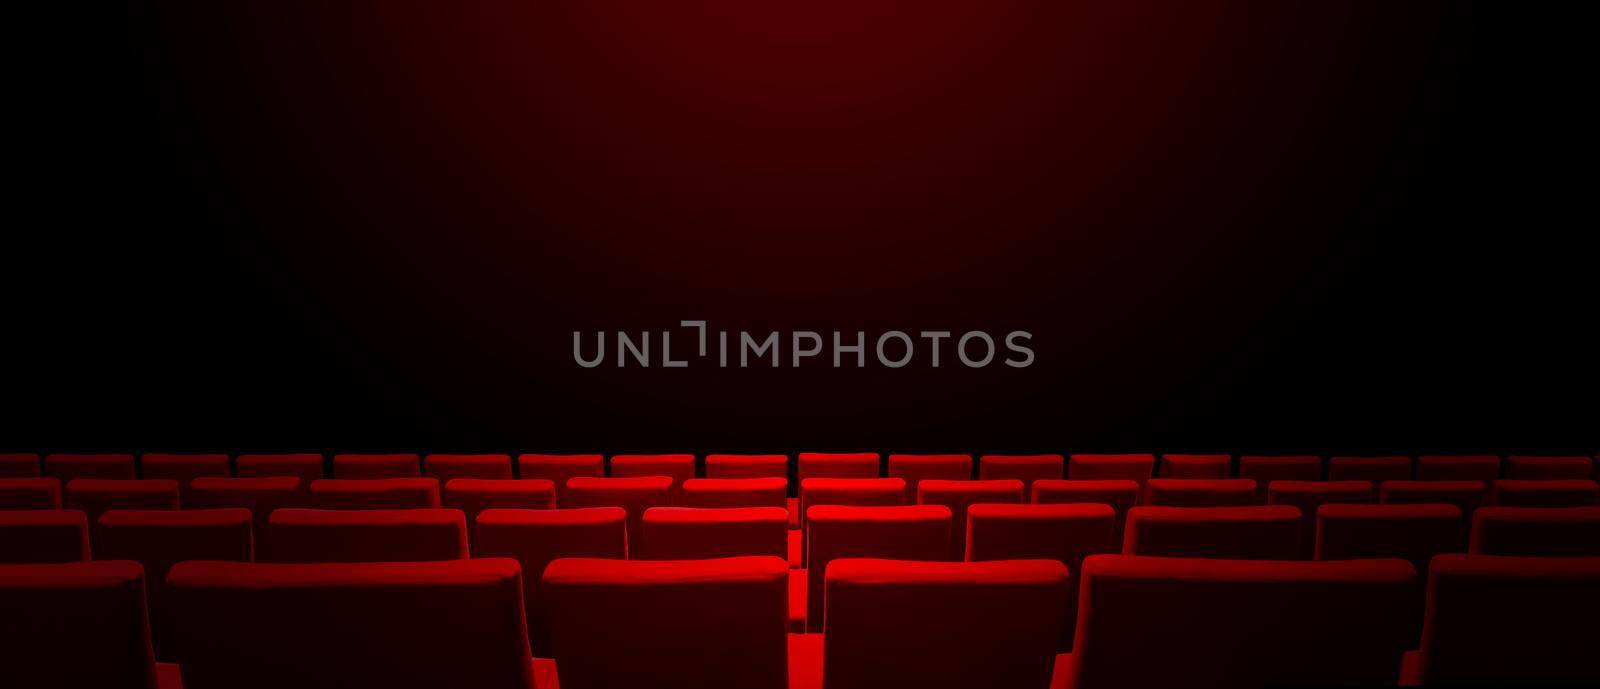 Cinema movie theatre with red seats rows and a black copy space background. Horizontal banner